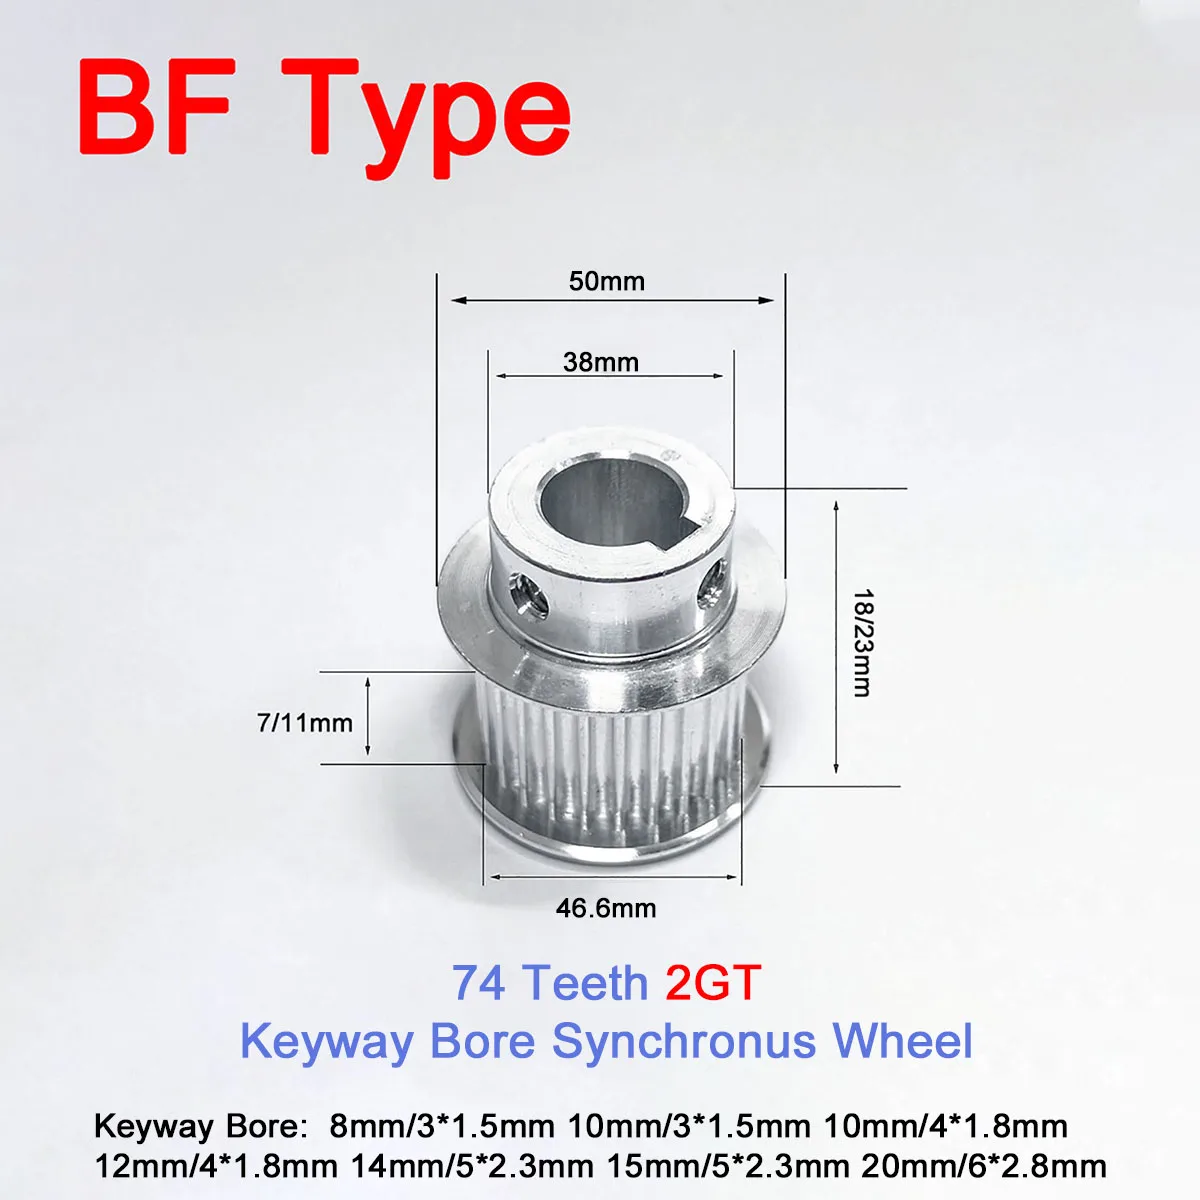 

1Pc 74 Teeth 2GT GT2 Timing Pulley BF Type Bore 8/10/12/14/15/20mm Keyway Synchronous Wheel Width 7/11mm Aluminium Idler Pulley